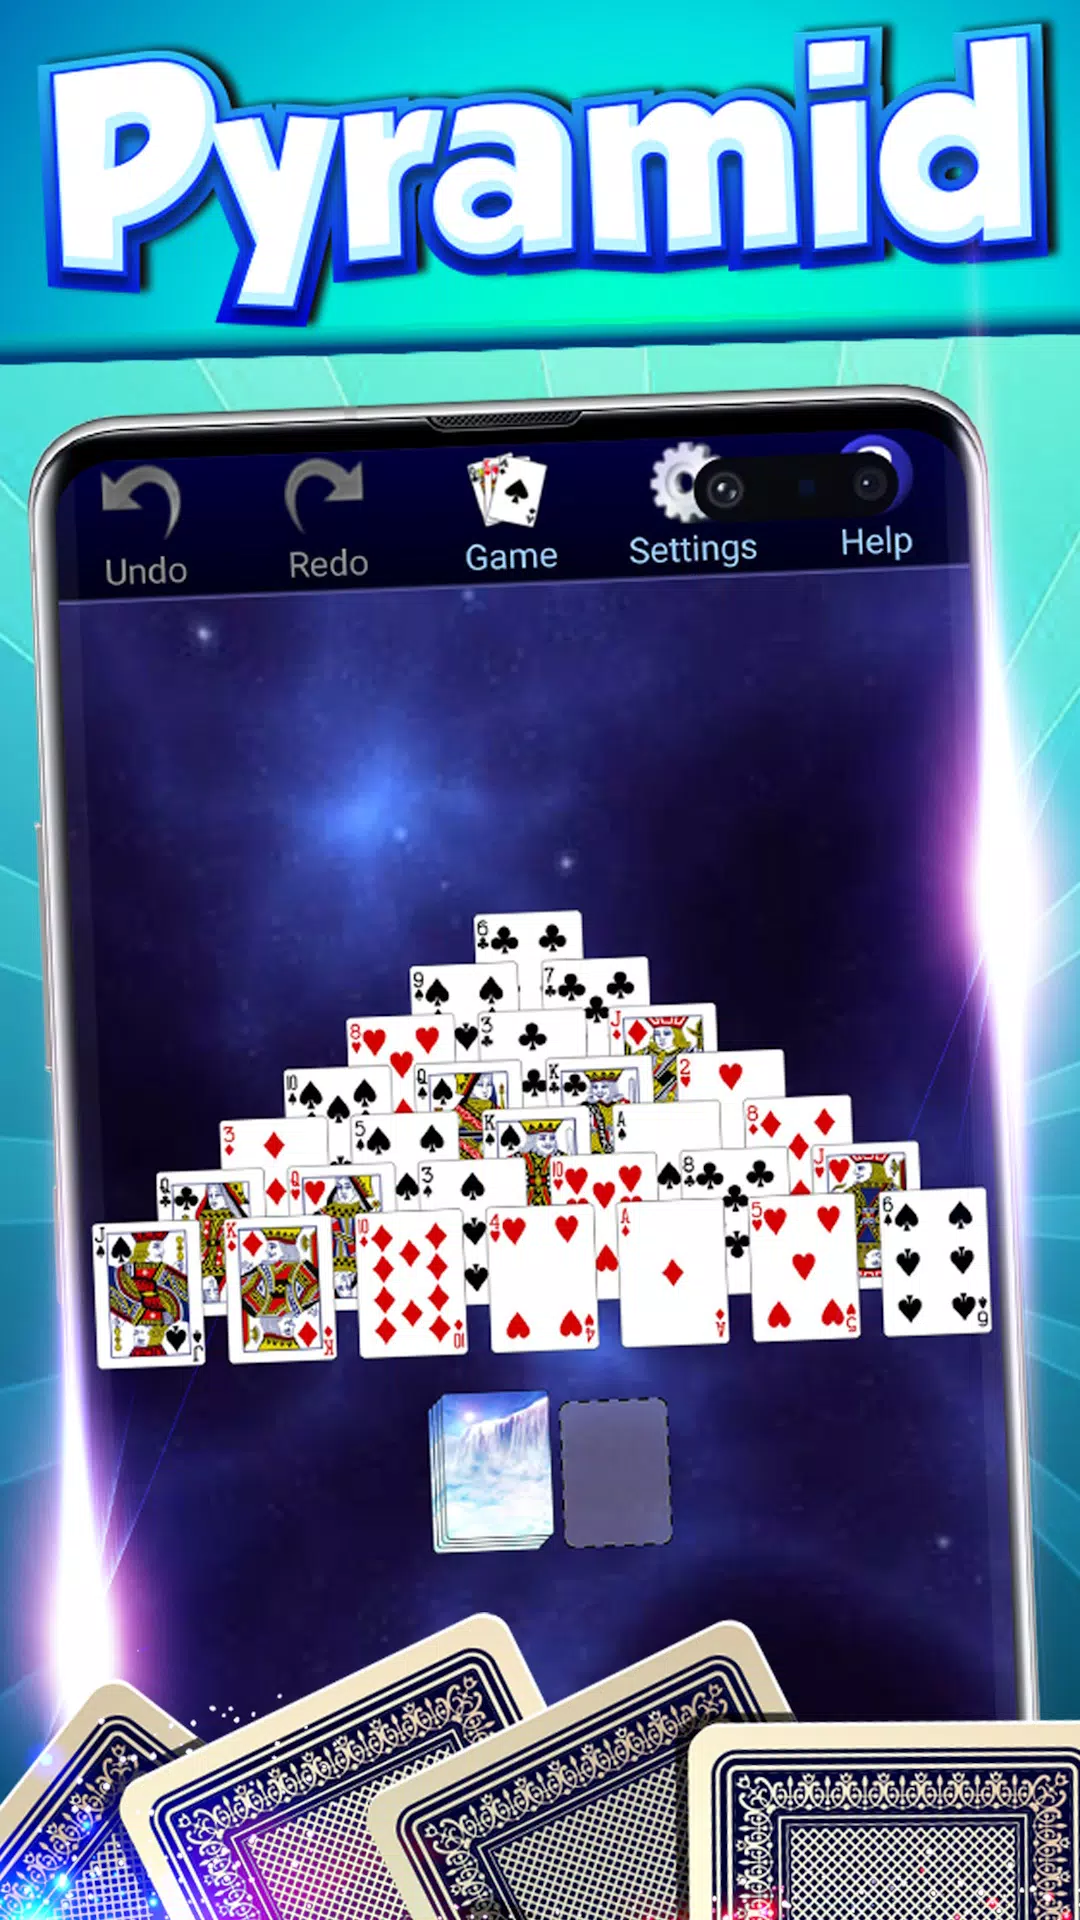 Funny Solitaire-Card Game Apk Download for Android- Latest version 1.0.6-  com.funnygame.solitaire.card